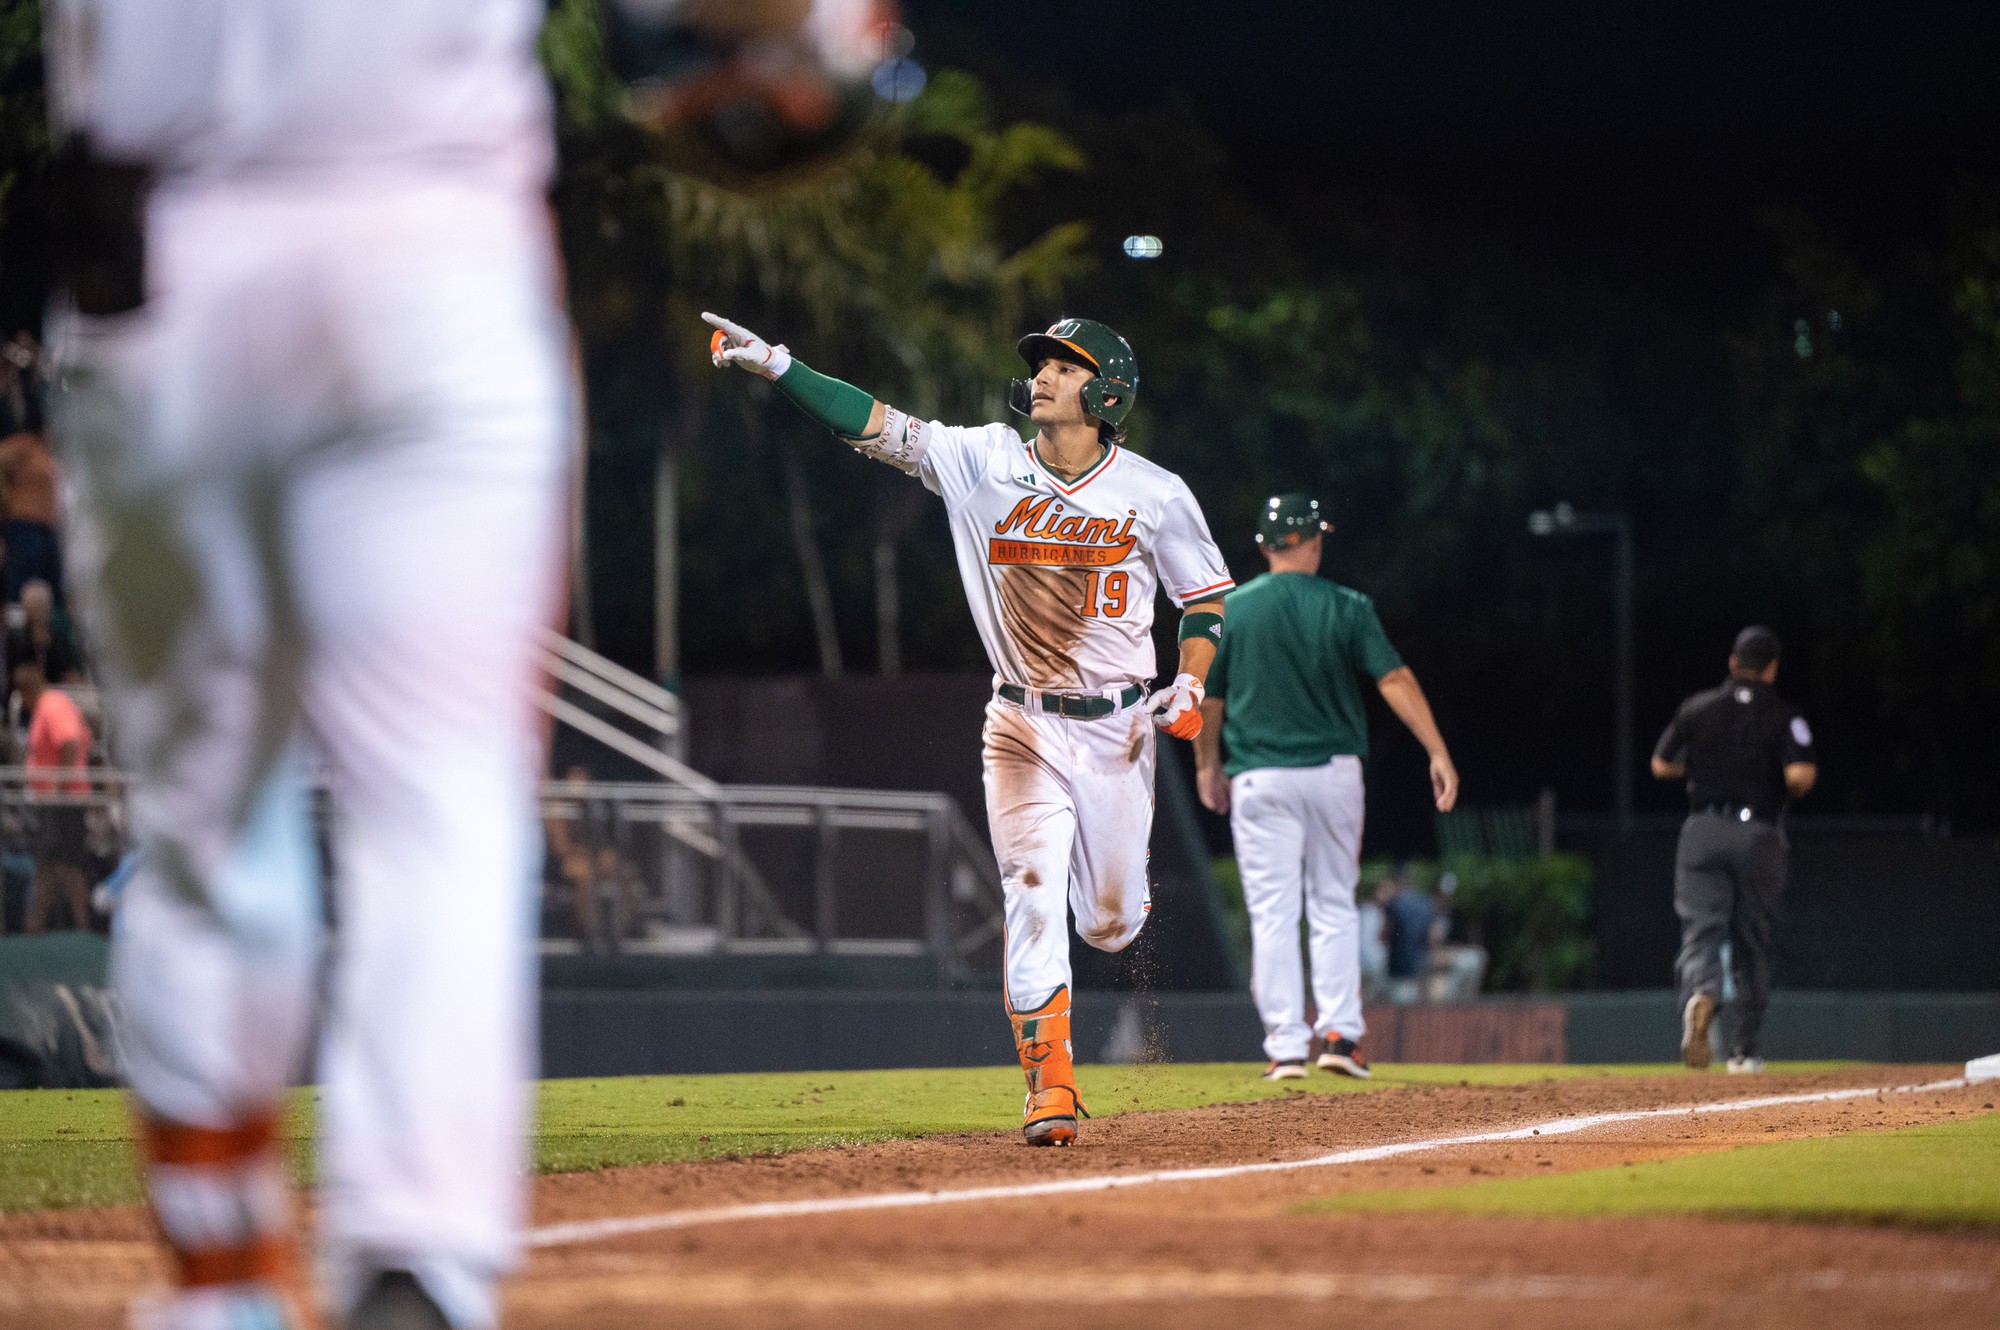 Canes begin 2023 season with 9-5 loss to Penn State - The Miami